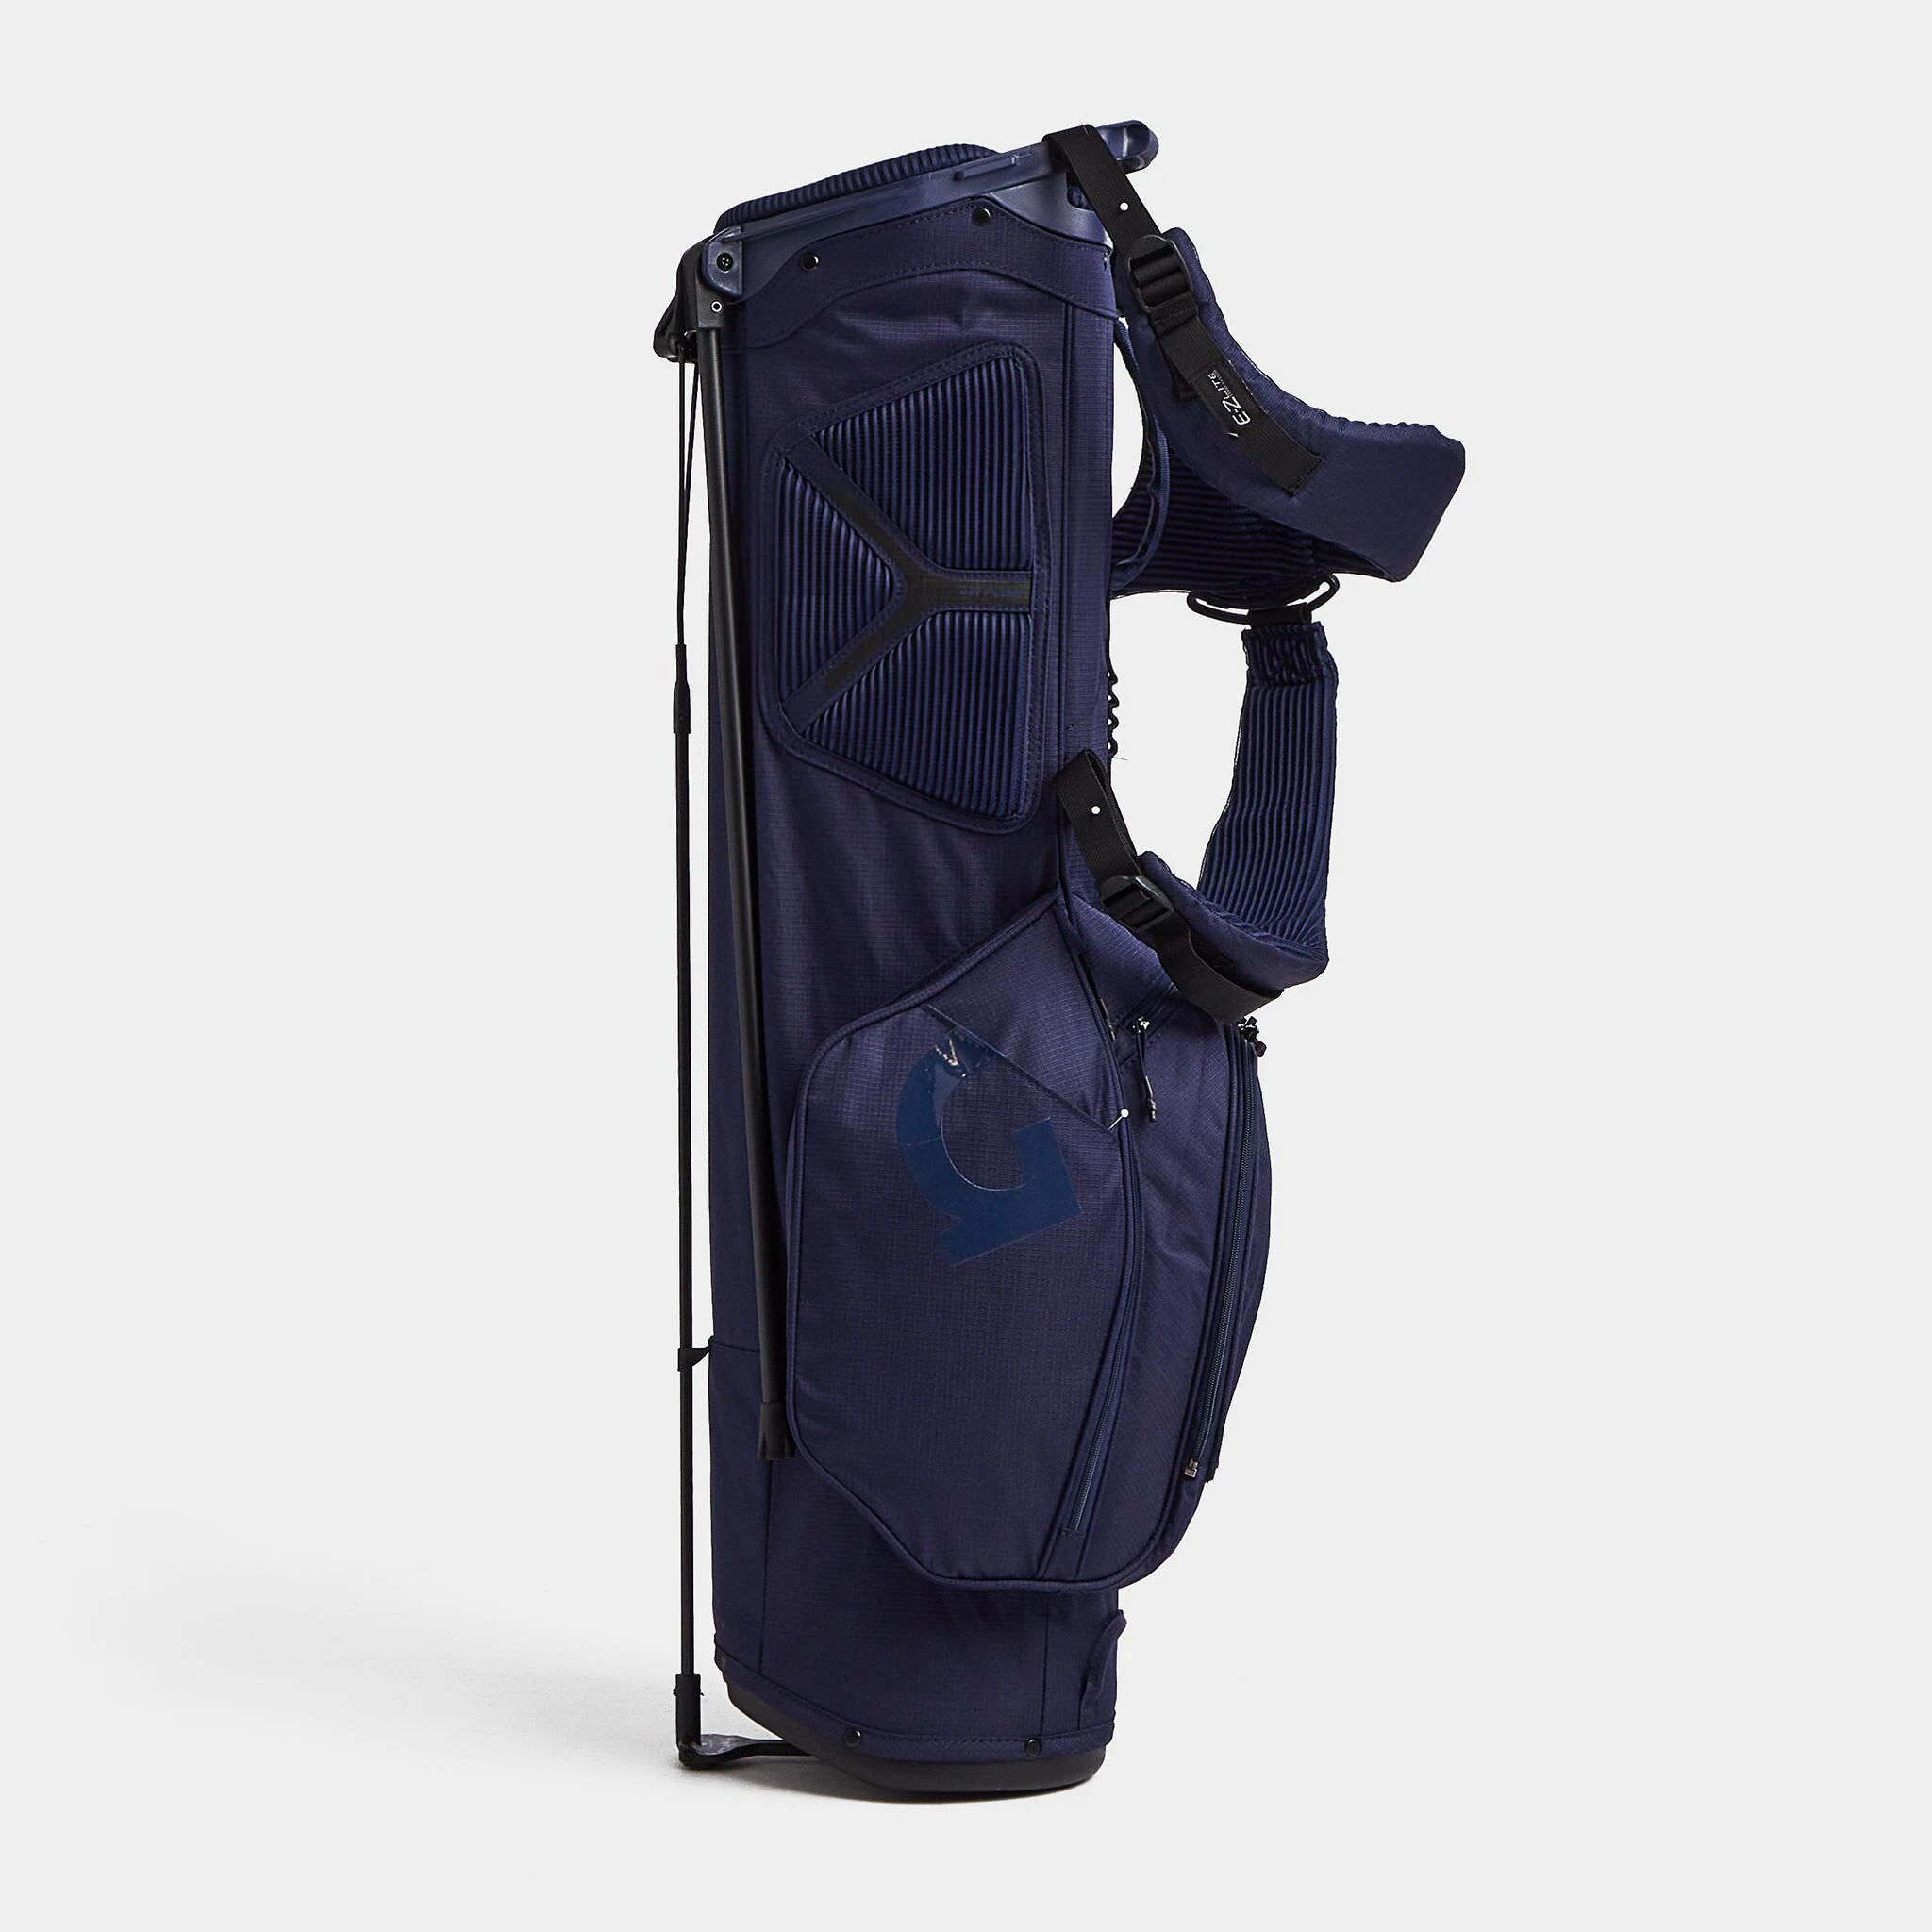 UNISEX CIRCLE G'S LIGHTWEIGHT CARRY GOLF BAG / G/FORE（ジーフォア